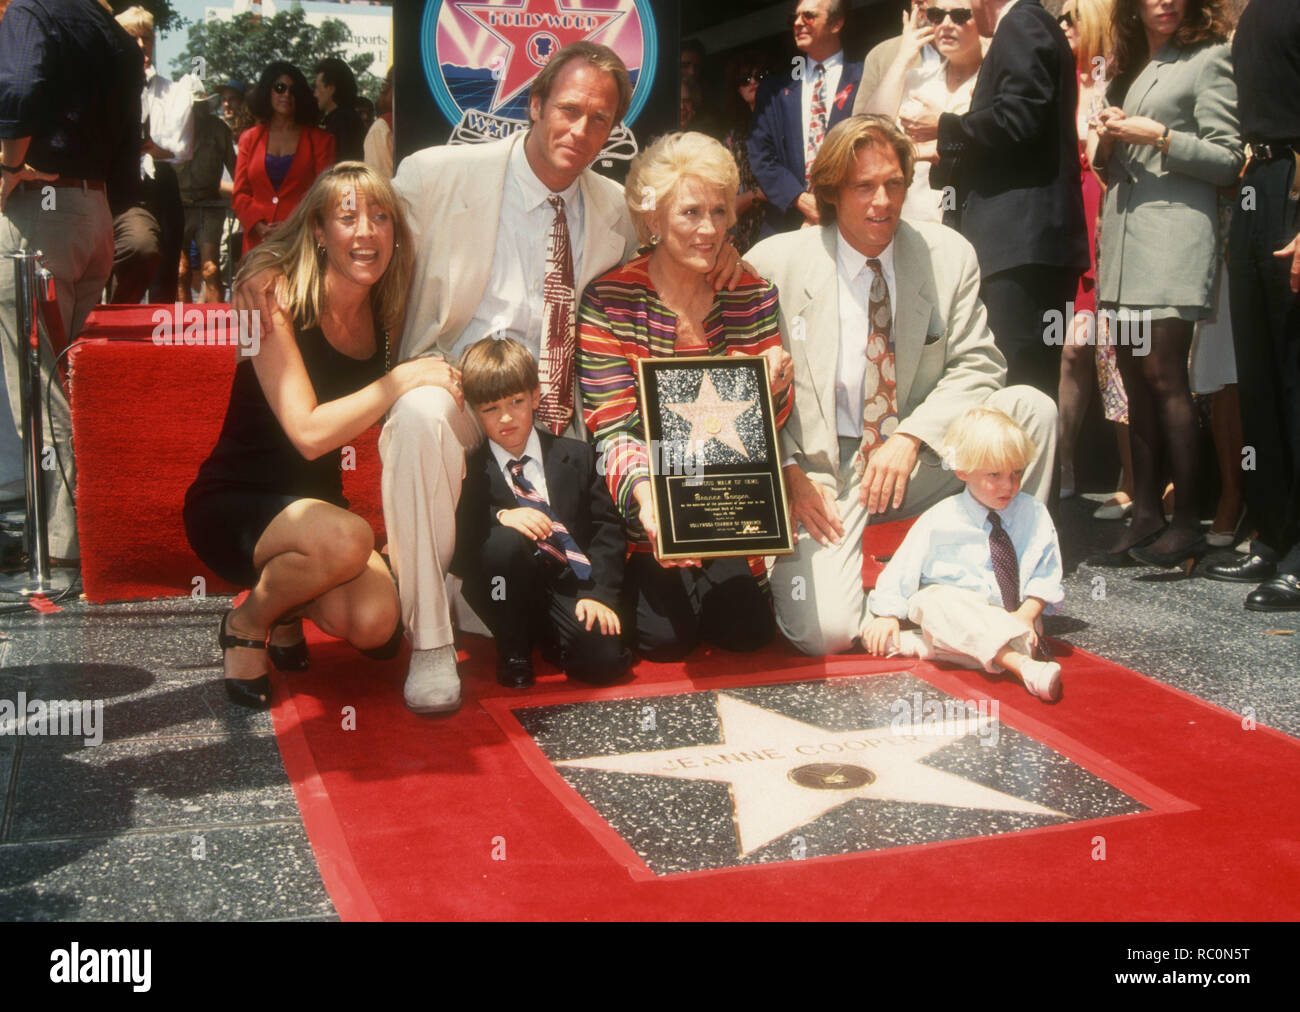 HOLLYWOOD, CA - AUGUST 20: Caren Bernsen, actor Corbin Bernsen, mother actress Jeanne Cooper, grandchildren and son Collin Bernsen attend Jeanne Cooper receives the 1,987th star on Hollywood Walk of Fame on August 20, 1993 on Hollywood Blvd in Hollywood, California. Photo by Barry King/Alamy Stock Photo Stock Photo